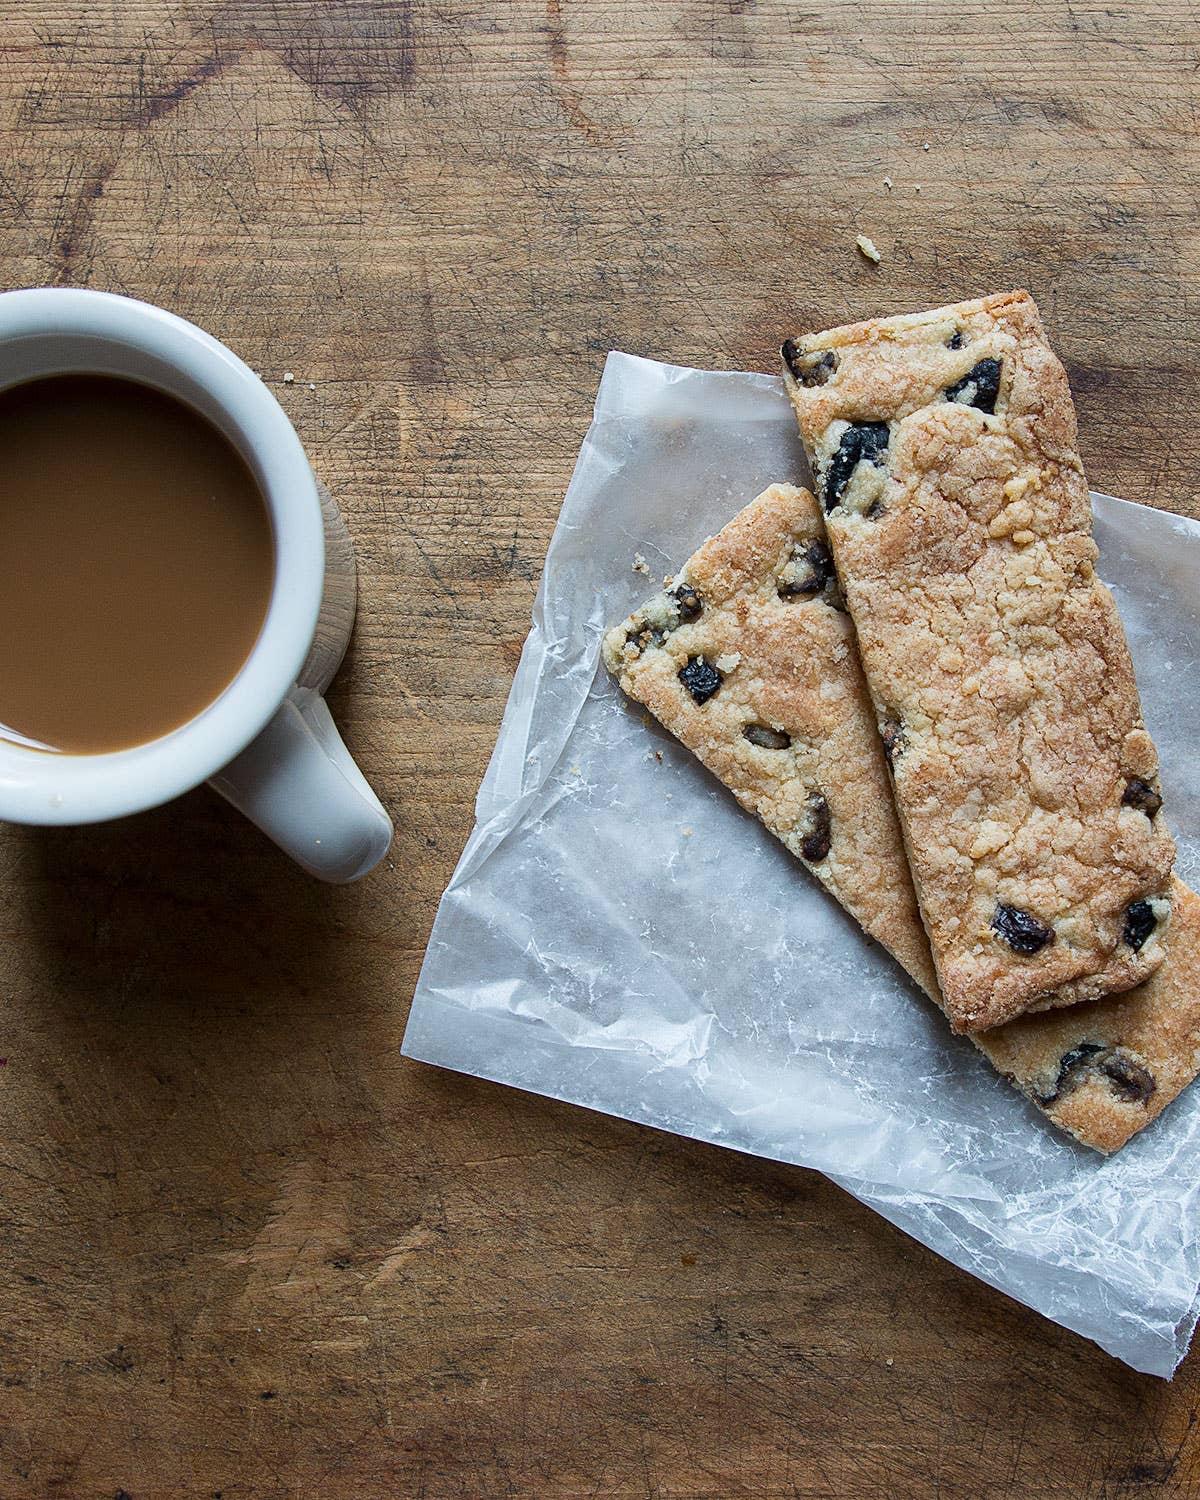 5 To Know: New York’s Unsung Pastries